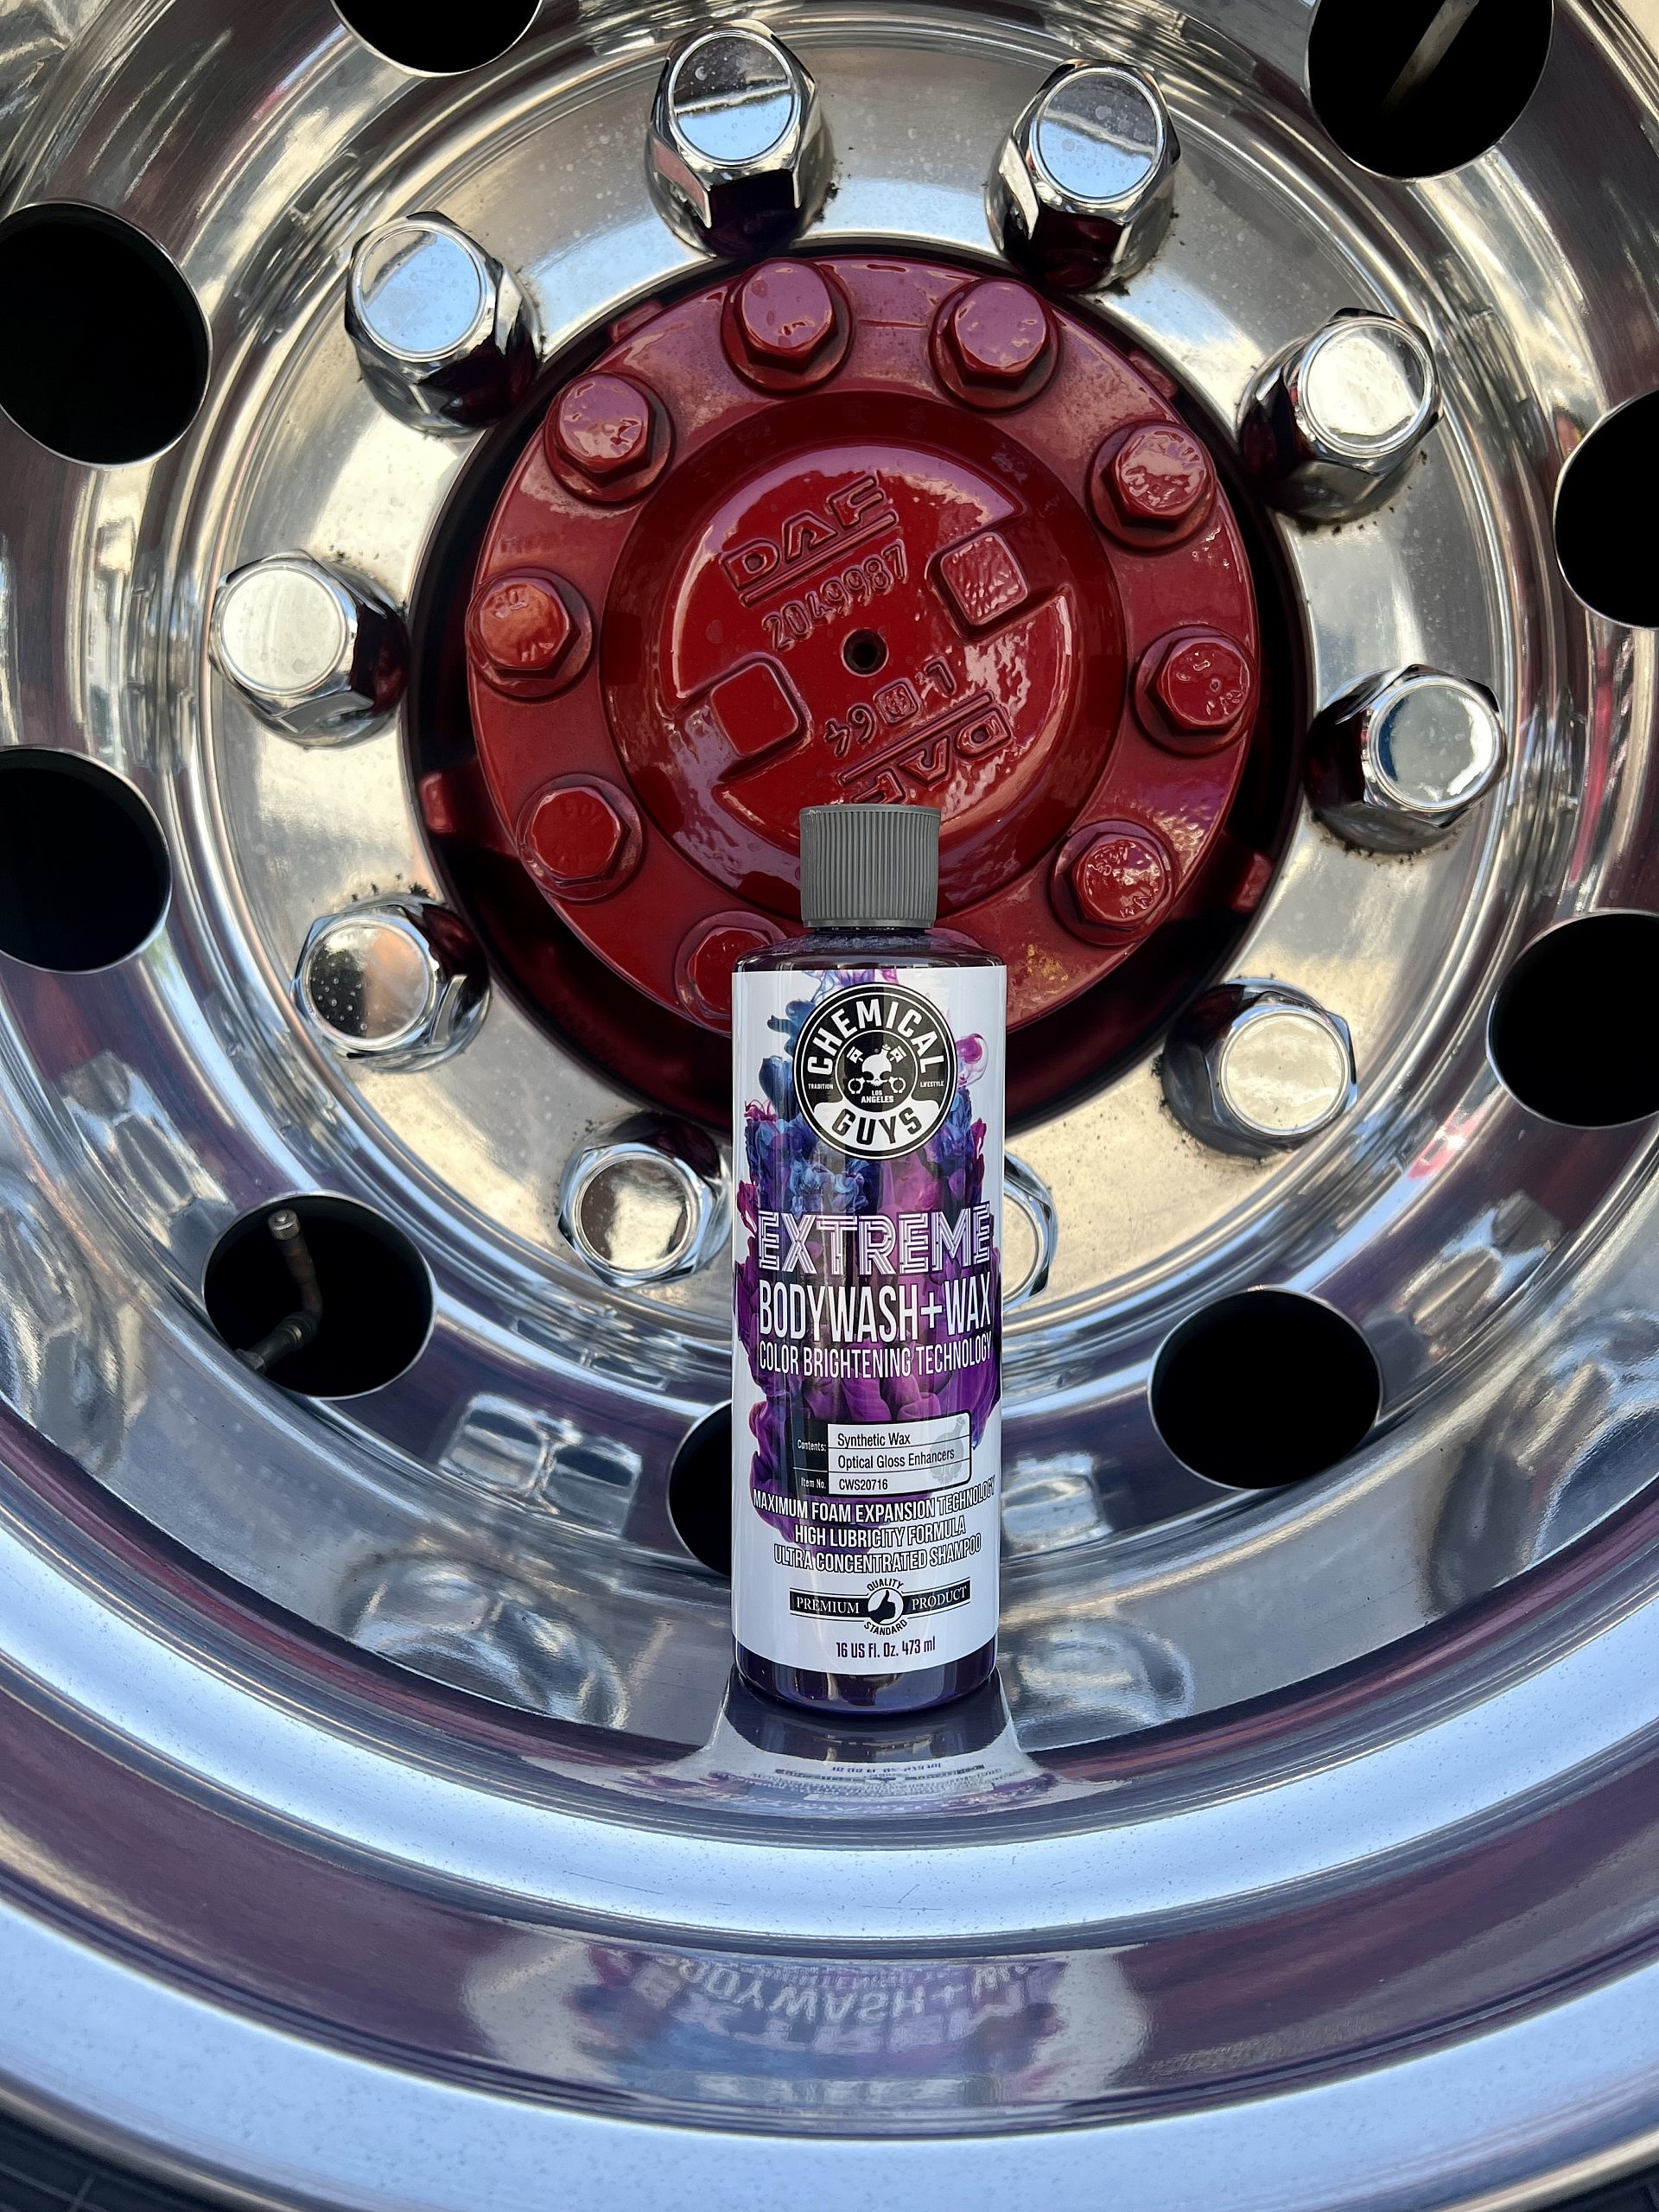 Chemical Guys Extreme Body Wash + Wax